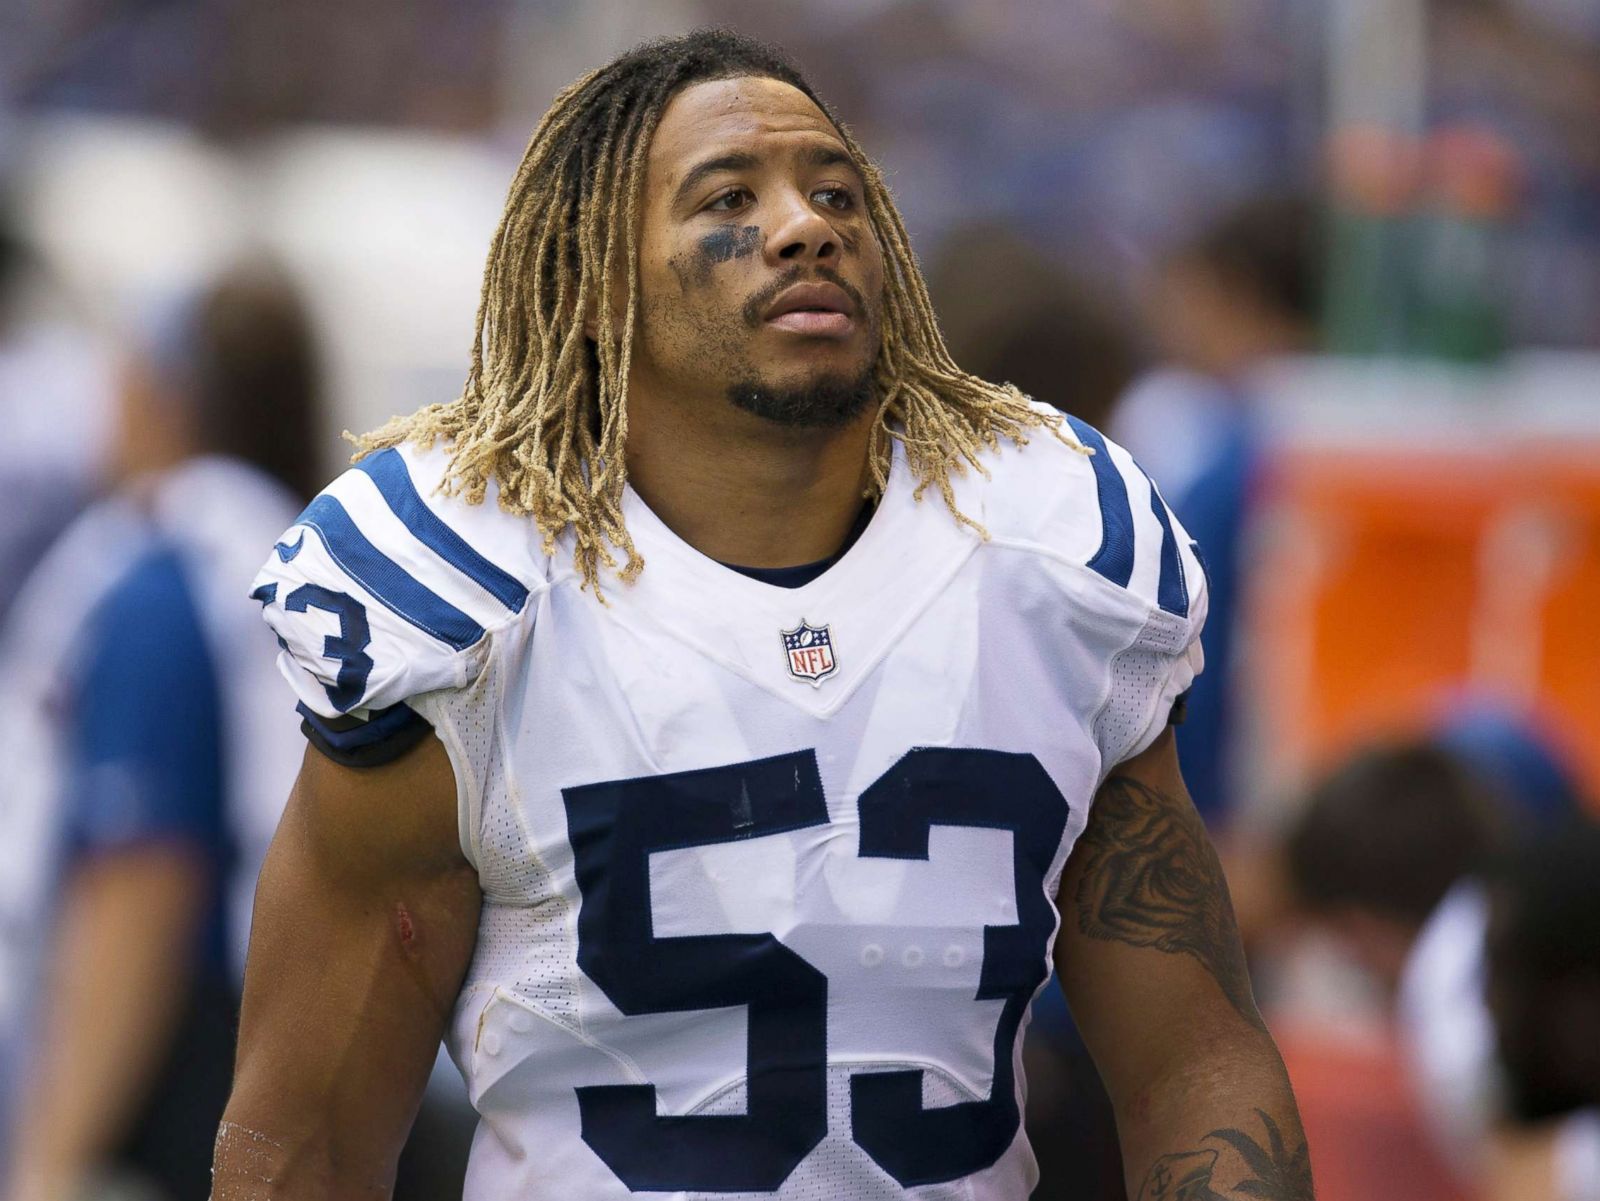 Car Crash That Killed Indianapolis Colts Player Allegedly